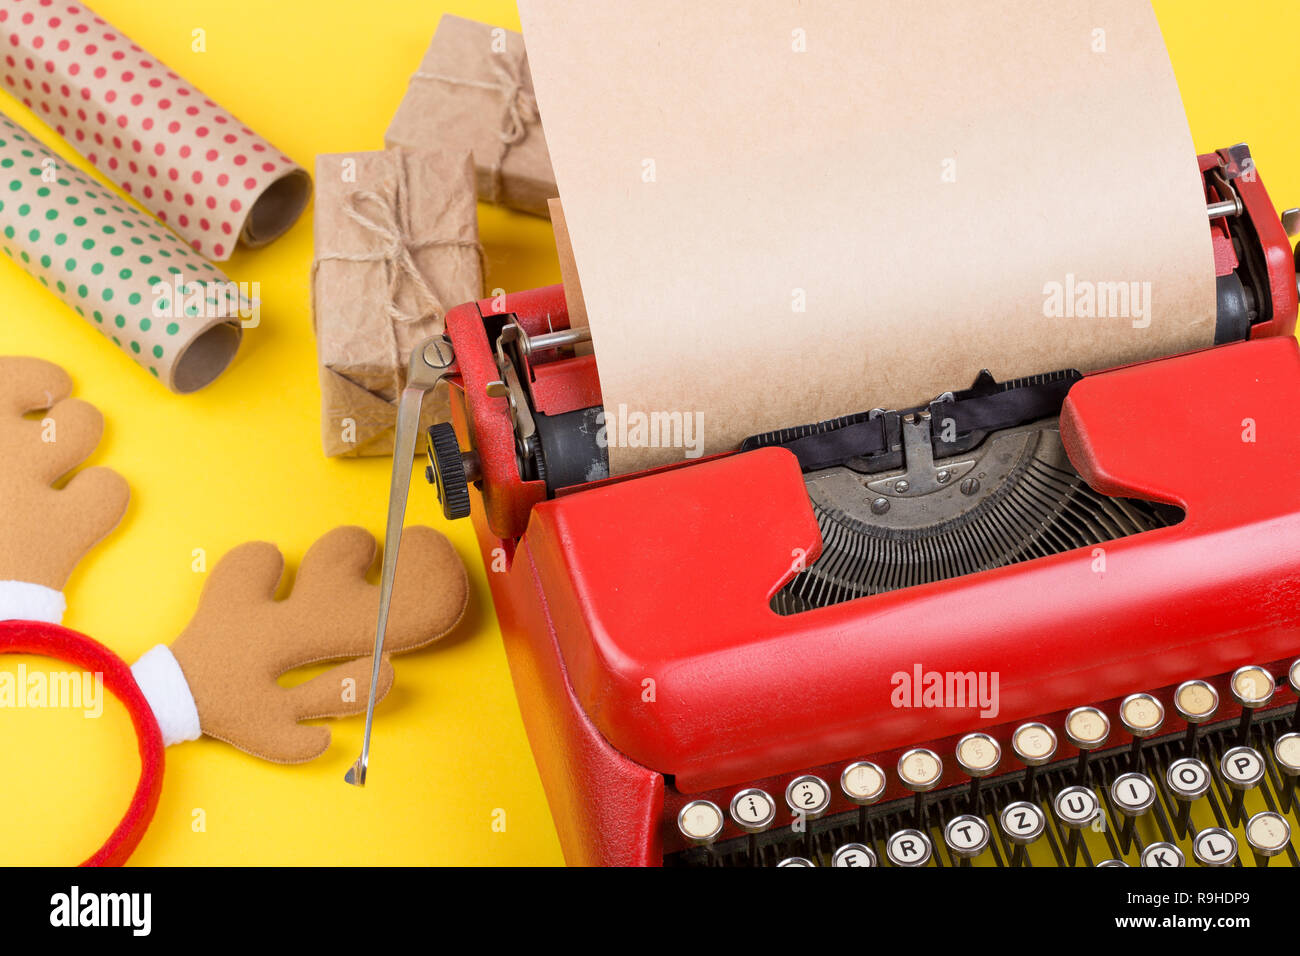 Holidays concept - red typewriter with blank craft paper, gift boxes and wrapping paper on yellow background Stock Photo